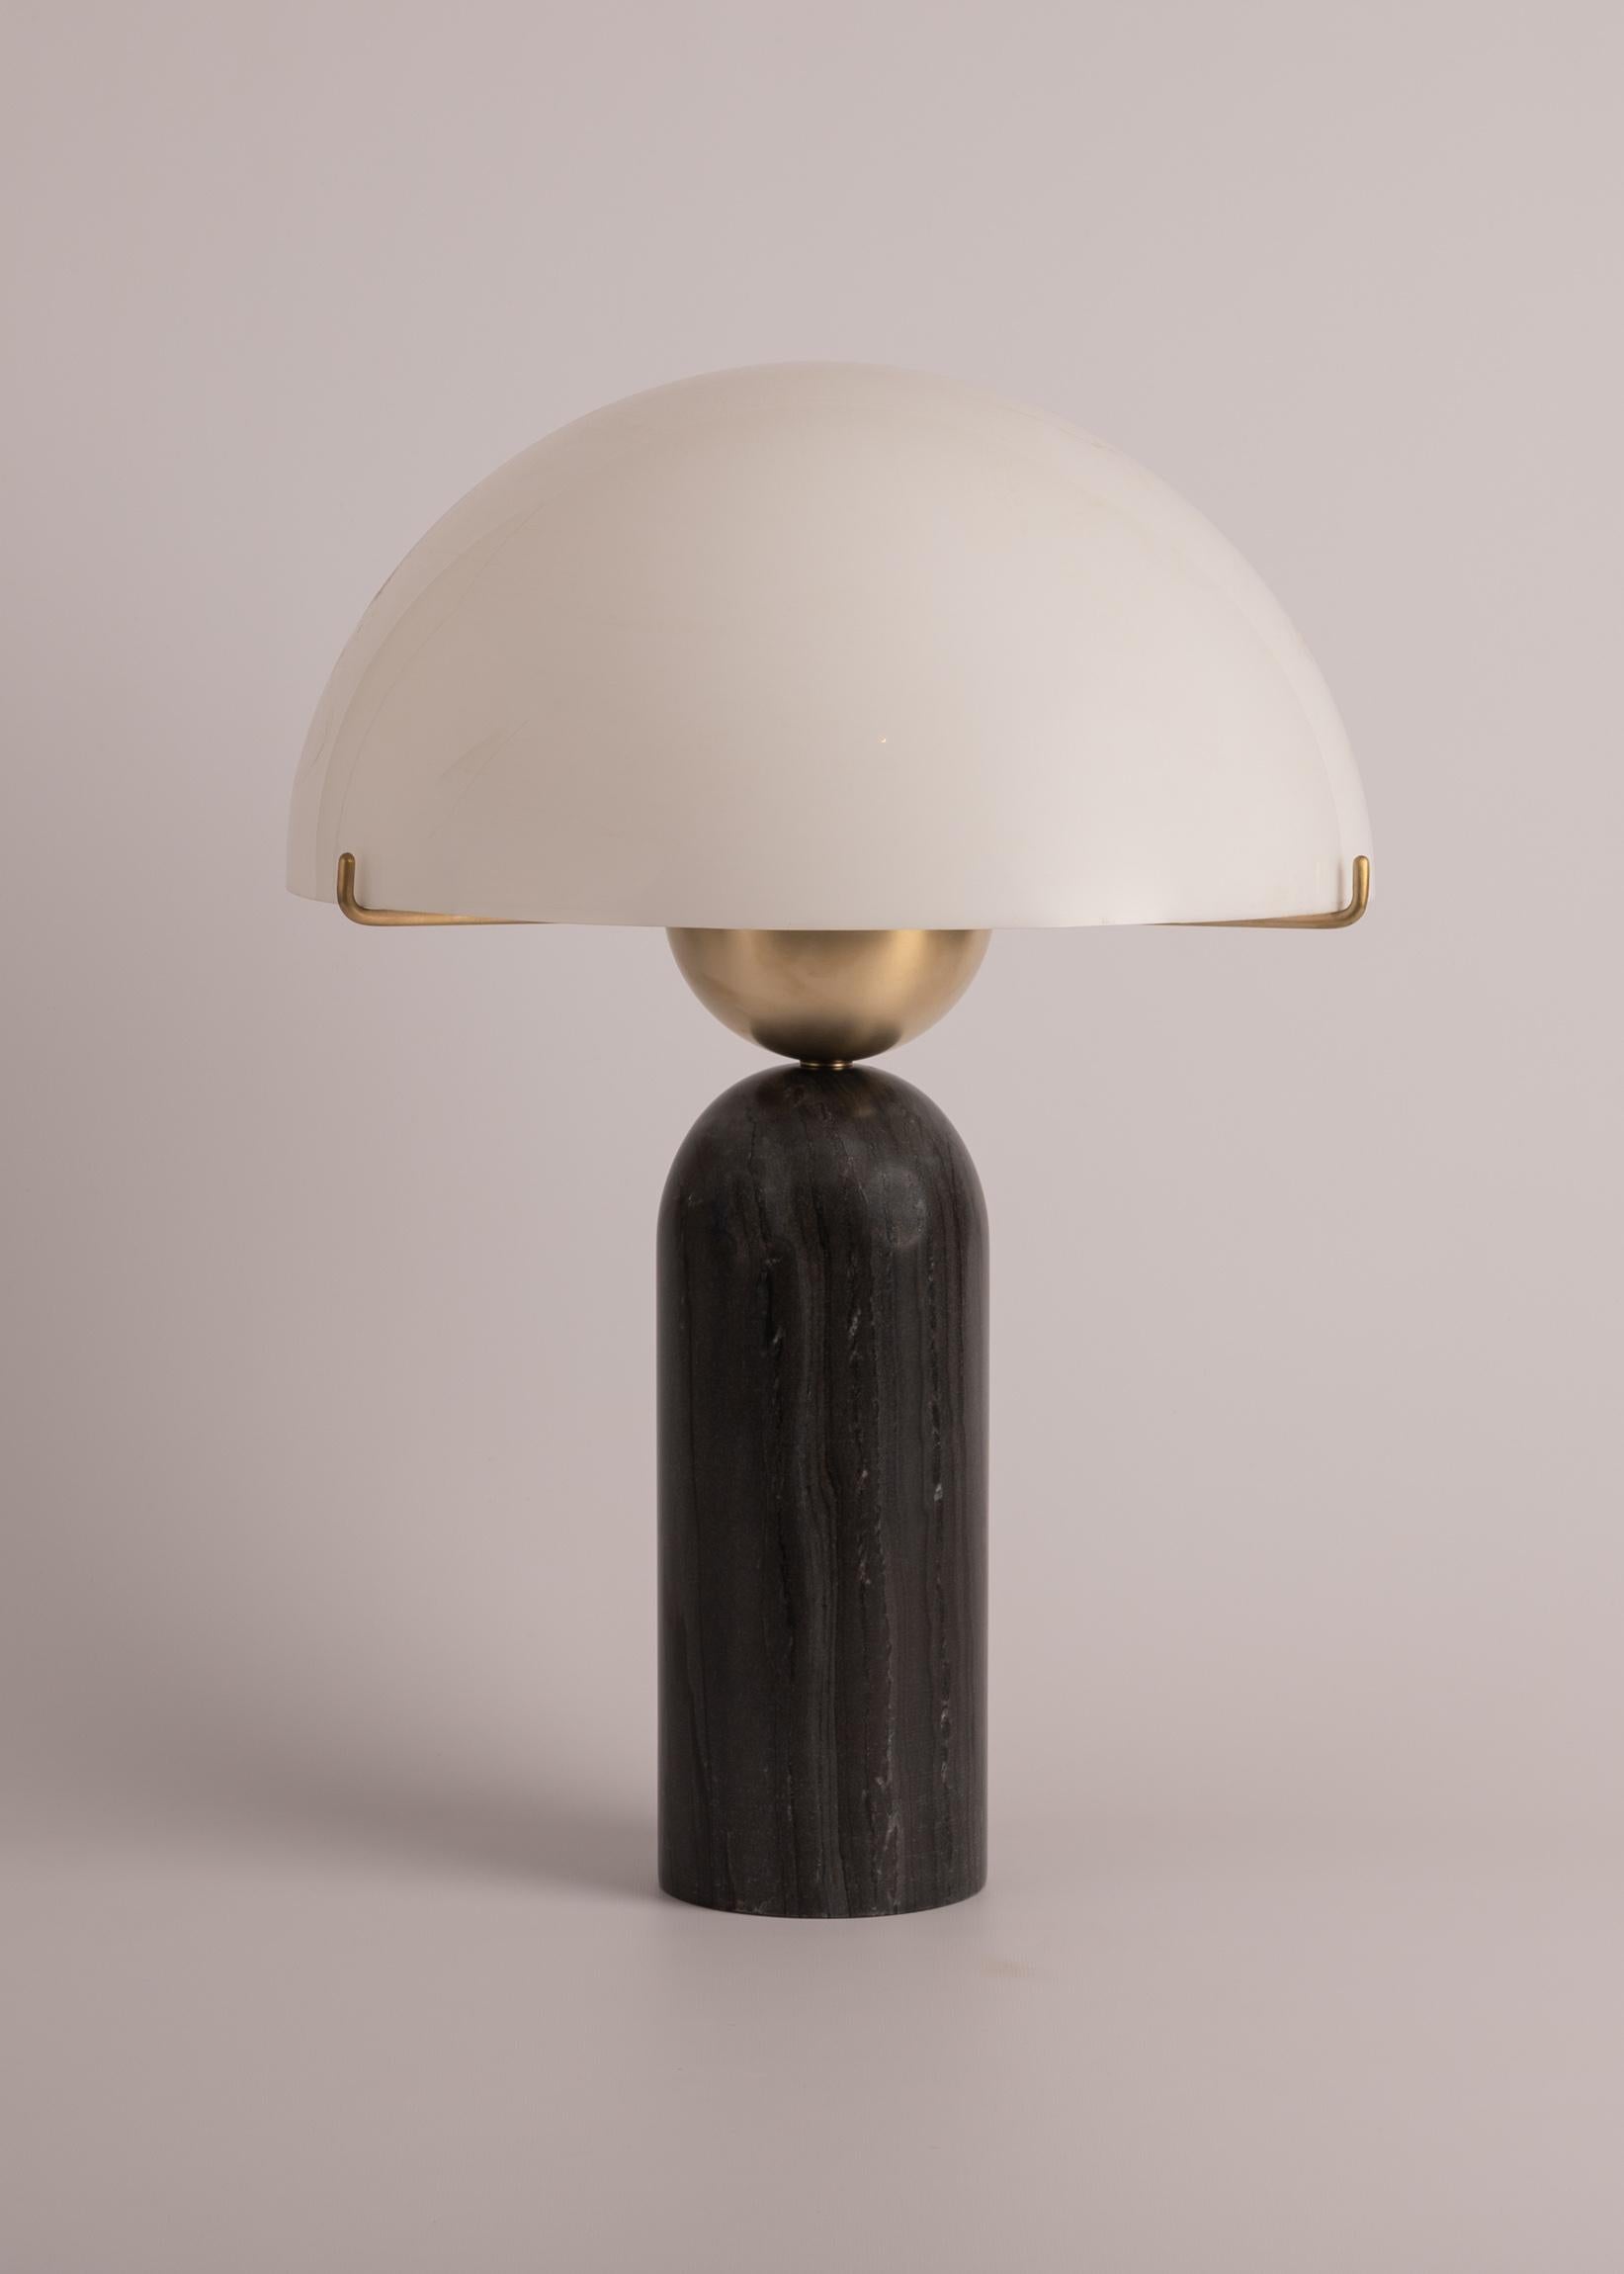 Black Marble Peono Table Lamp by Simone & Marcel
Dimensions: Ø 40.6 x H 61 cm.
Materials: Brass, acrylic and black marble.

Also available in different marble, wood and alabaster options and finishes. Custom options available on request. Please